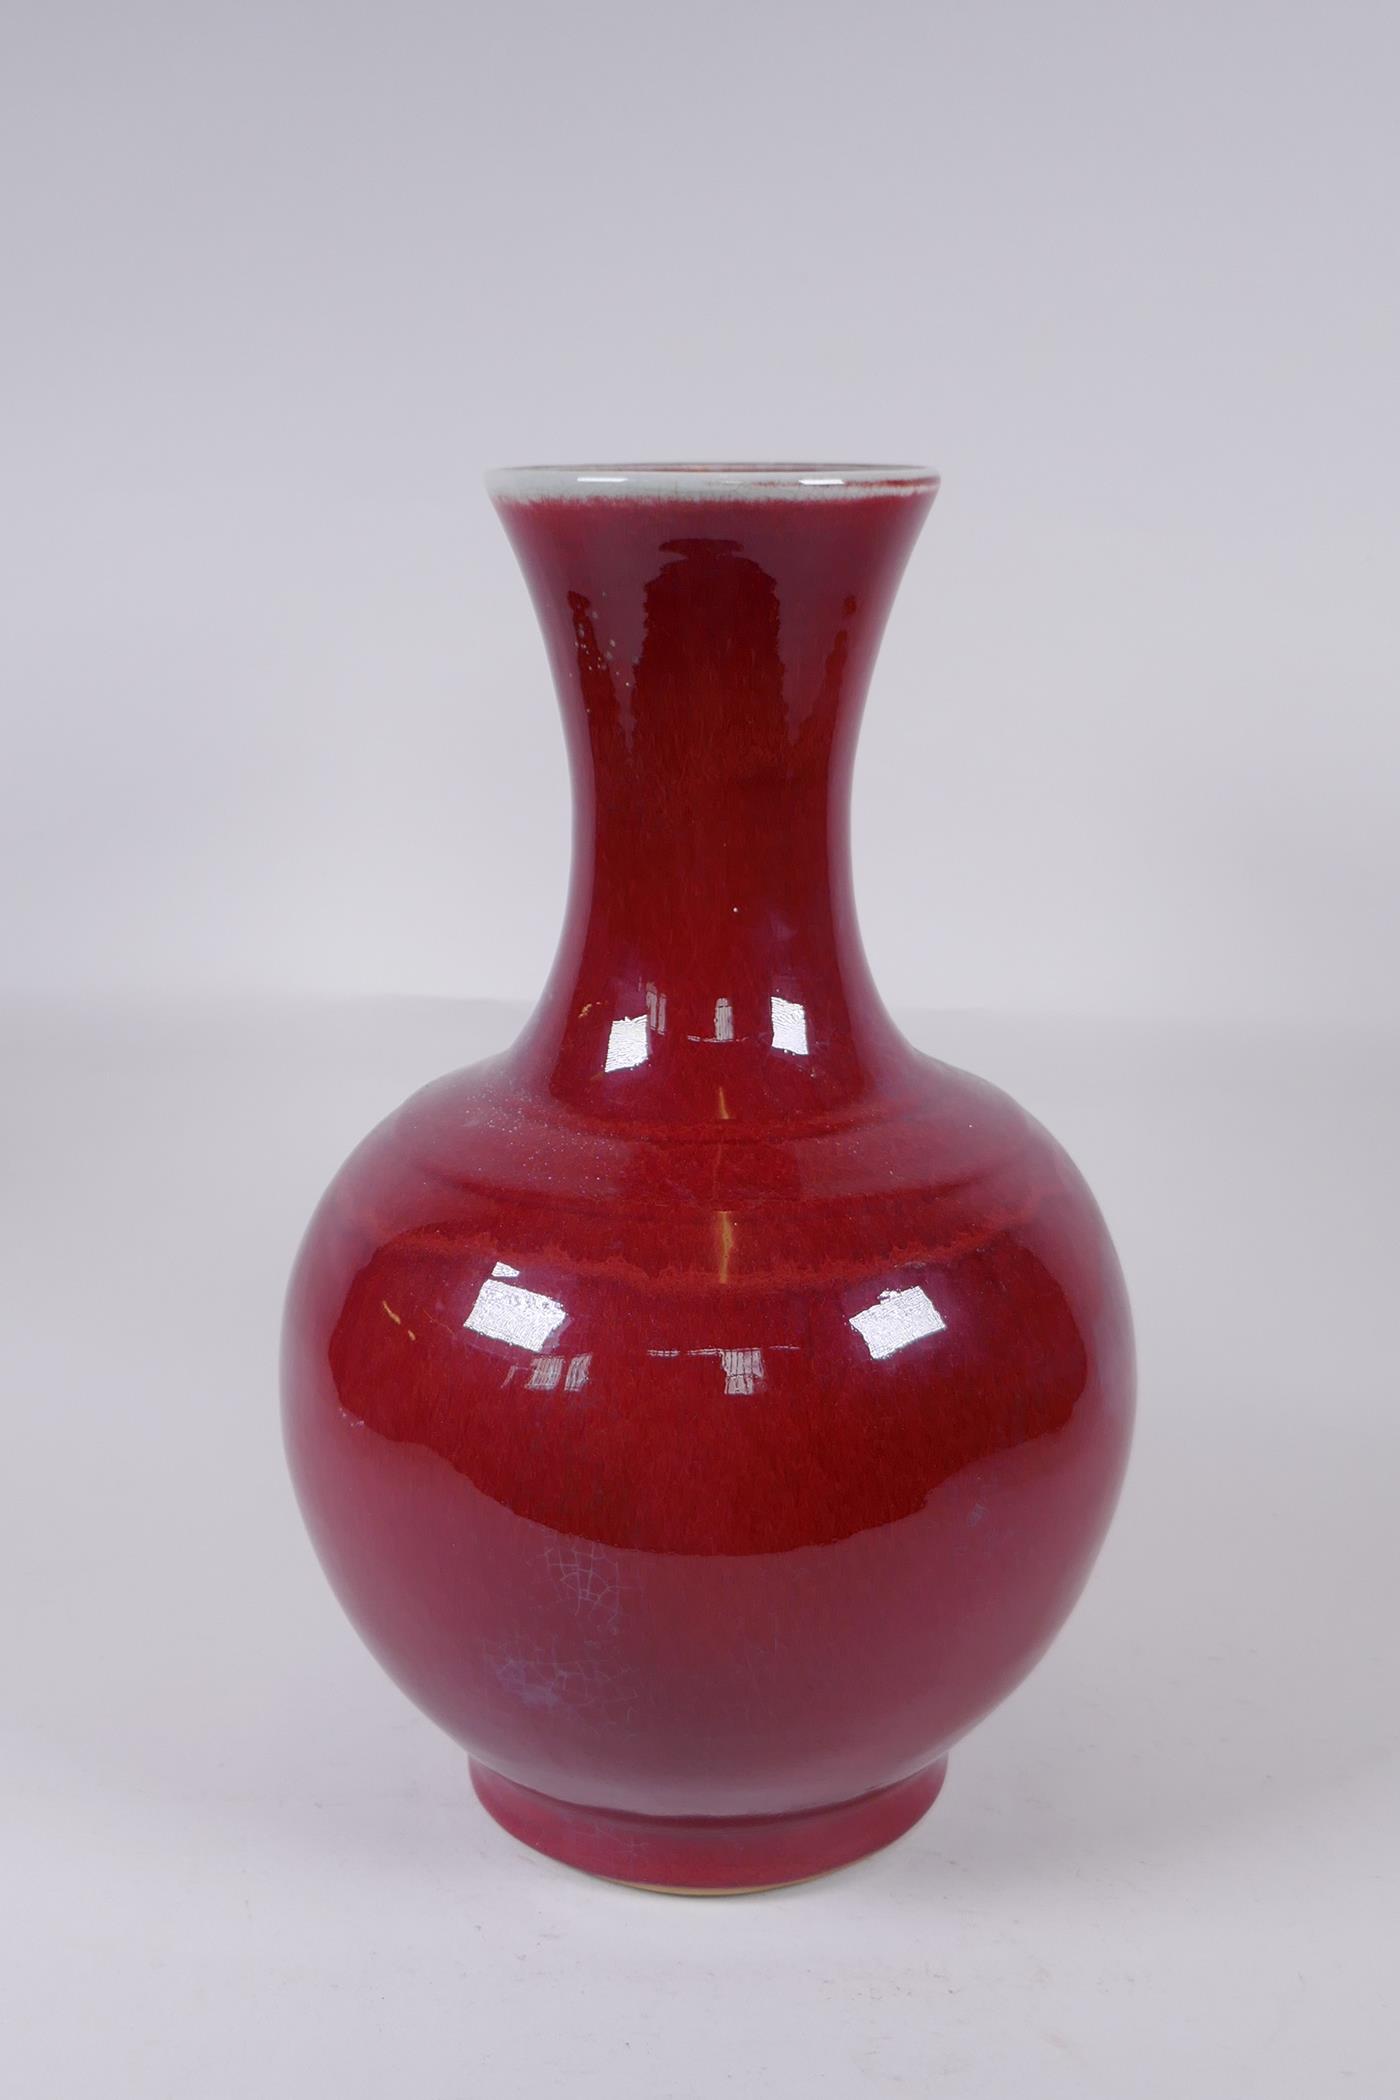 A sang de beouf glazed porcelain vase, Chinese Yongzheng 6 character mark to base, 34cm high - Image 2 of 4